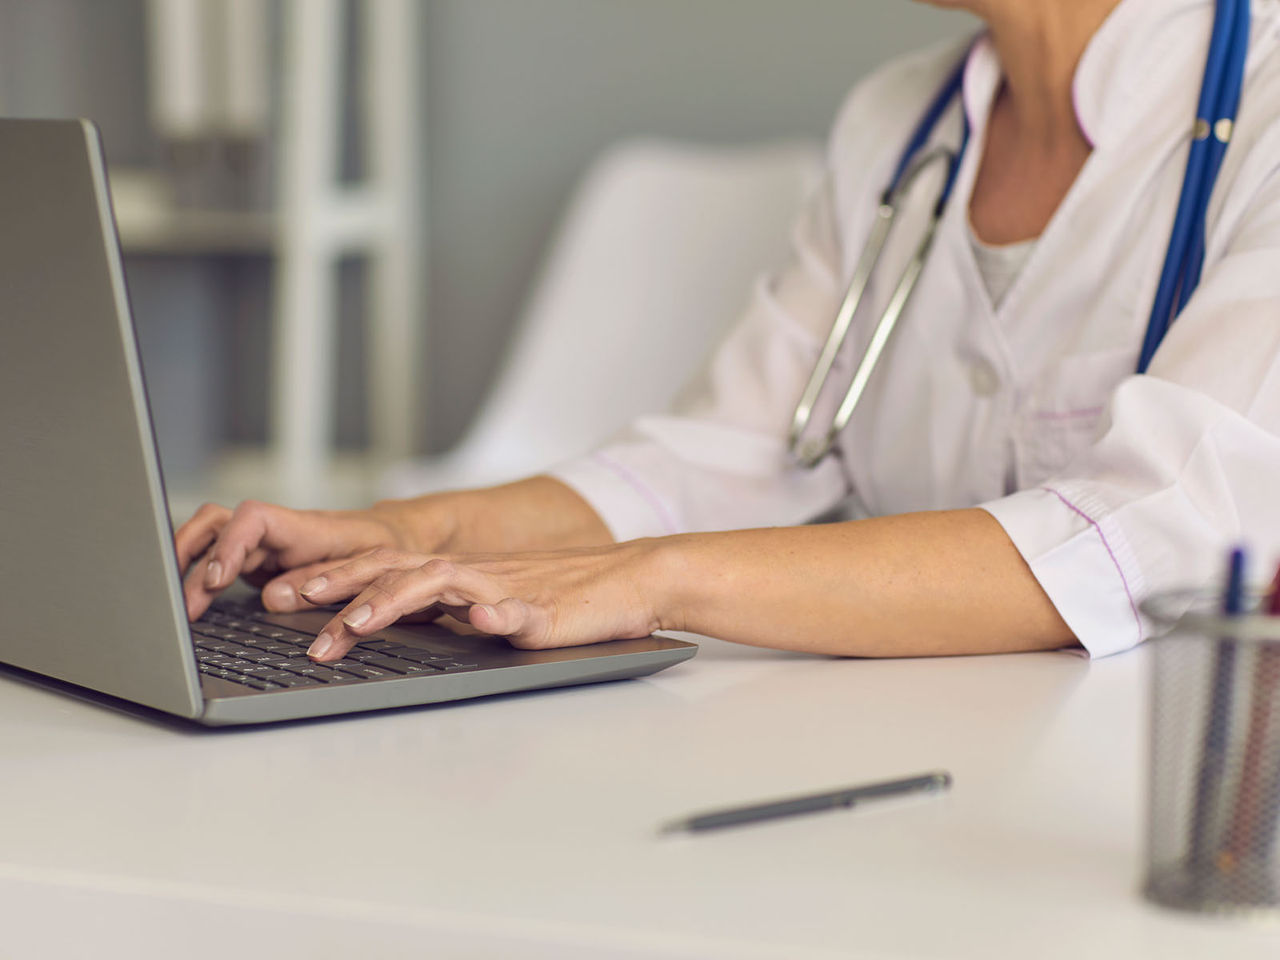 Healthcare professional typing on a laptop.